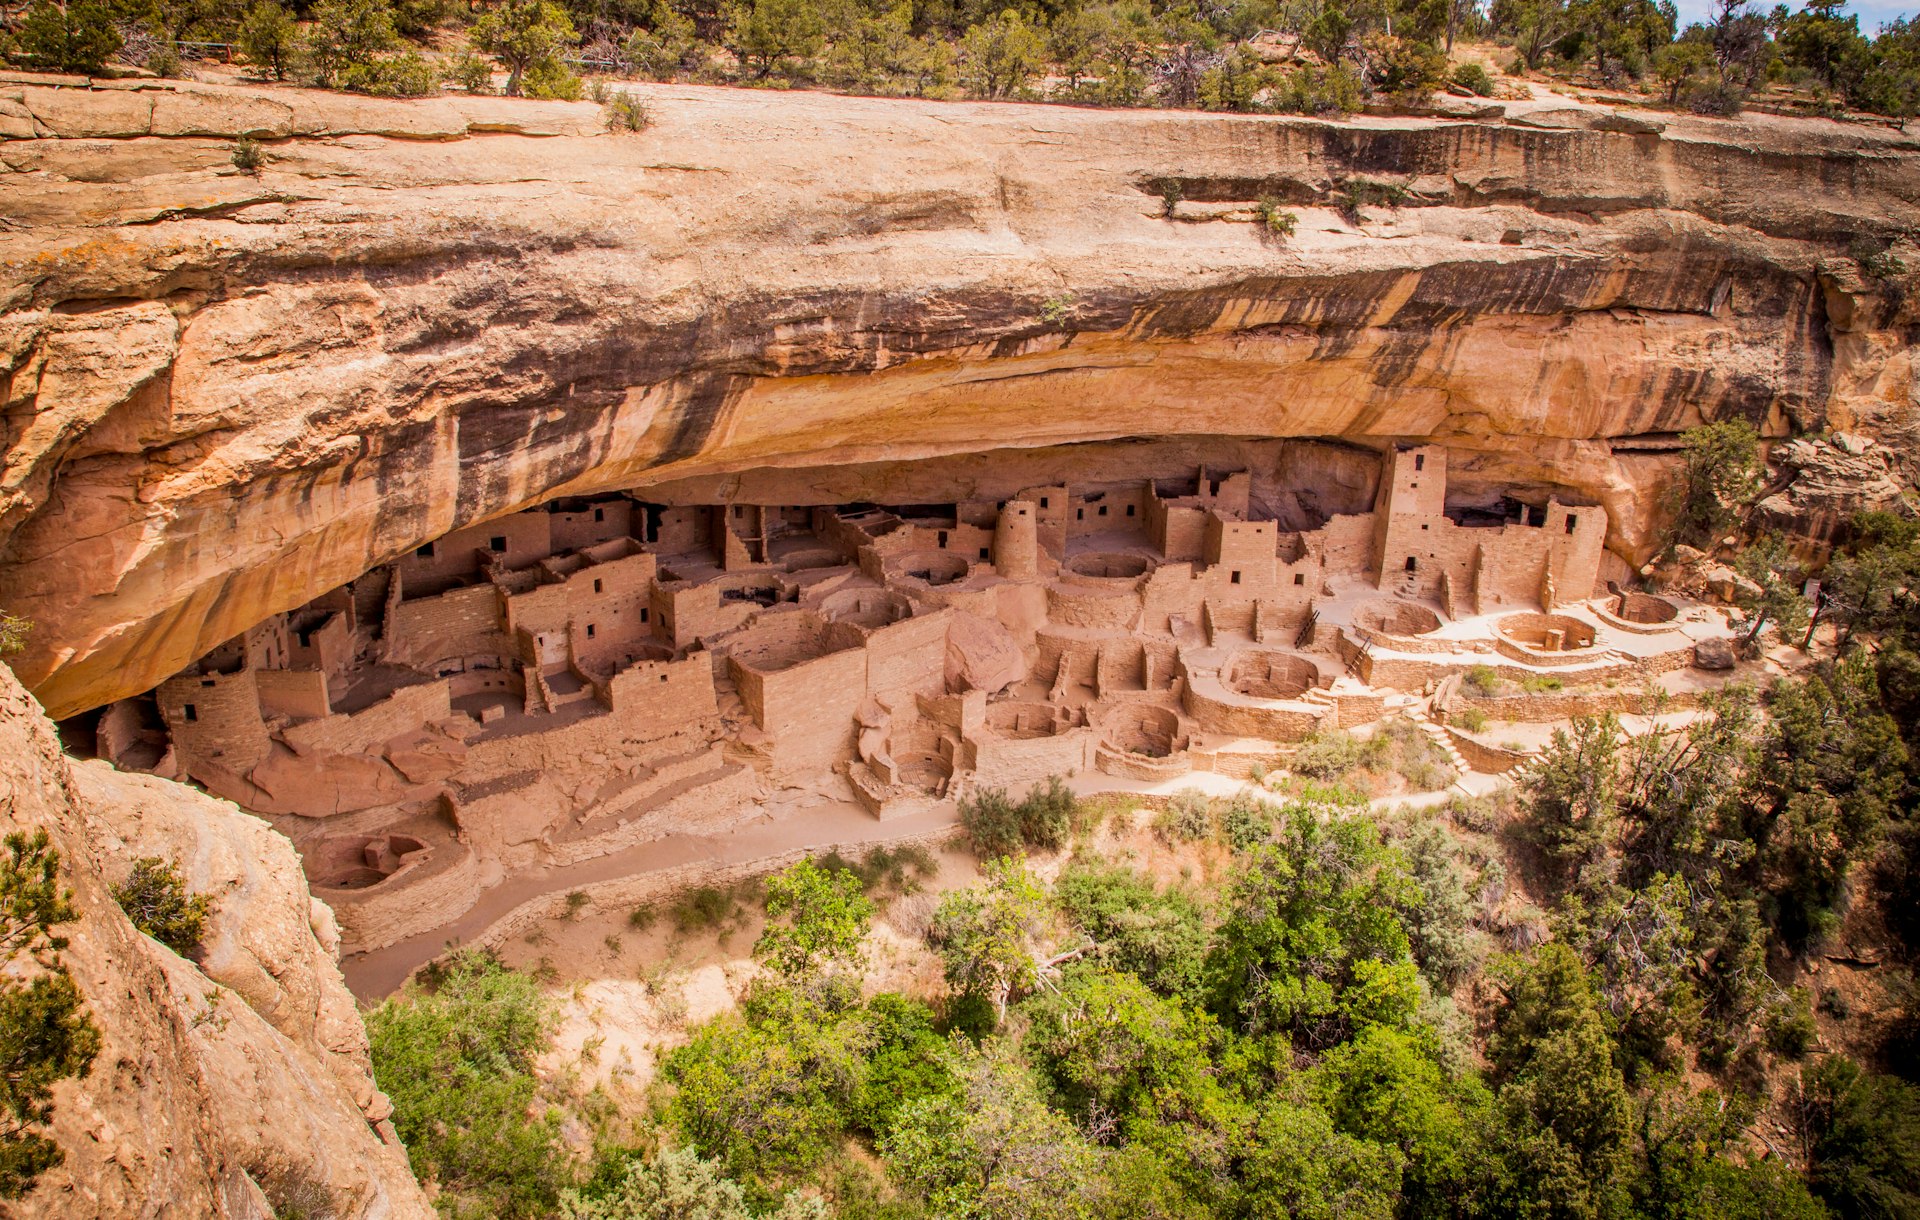 The cliffside dwellings at Mesa Verde National Park in Colorado